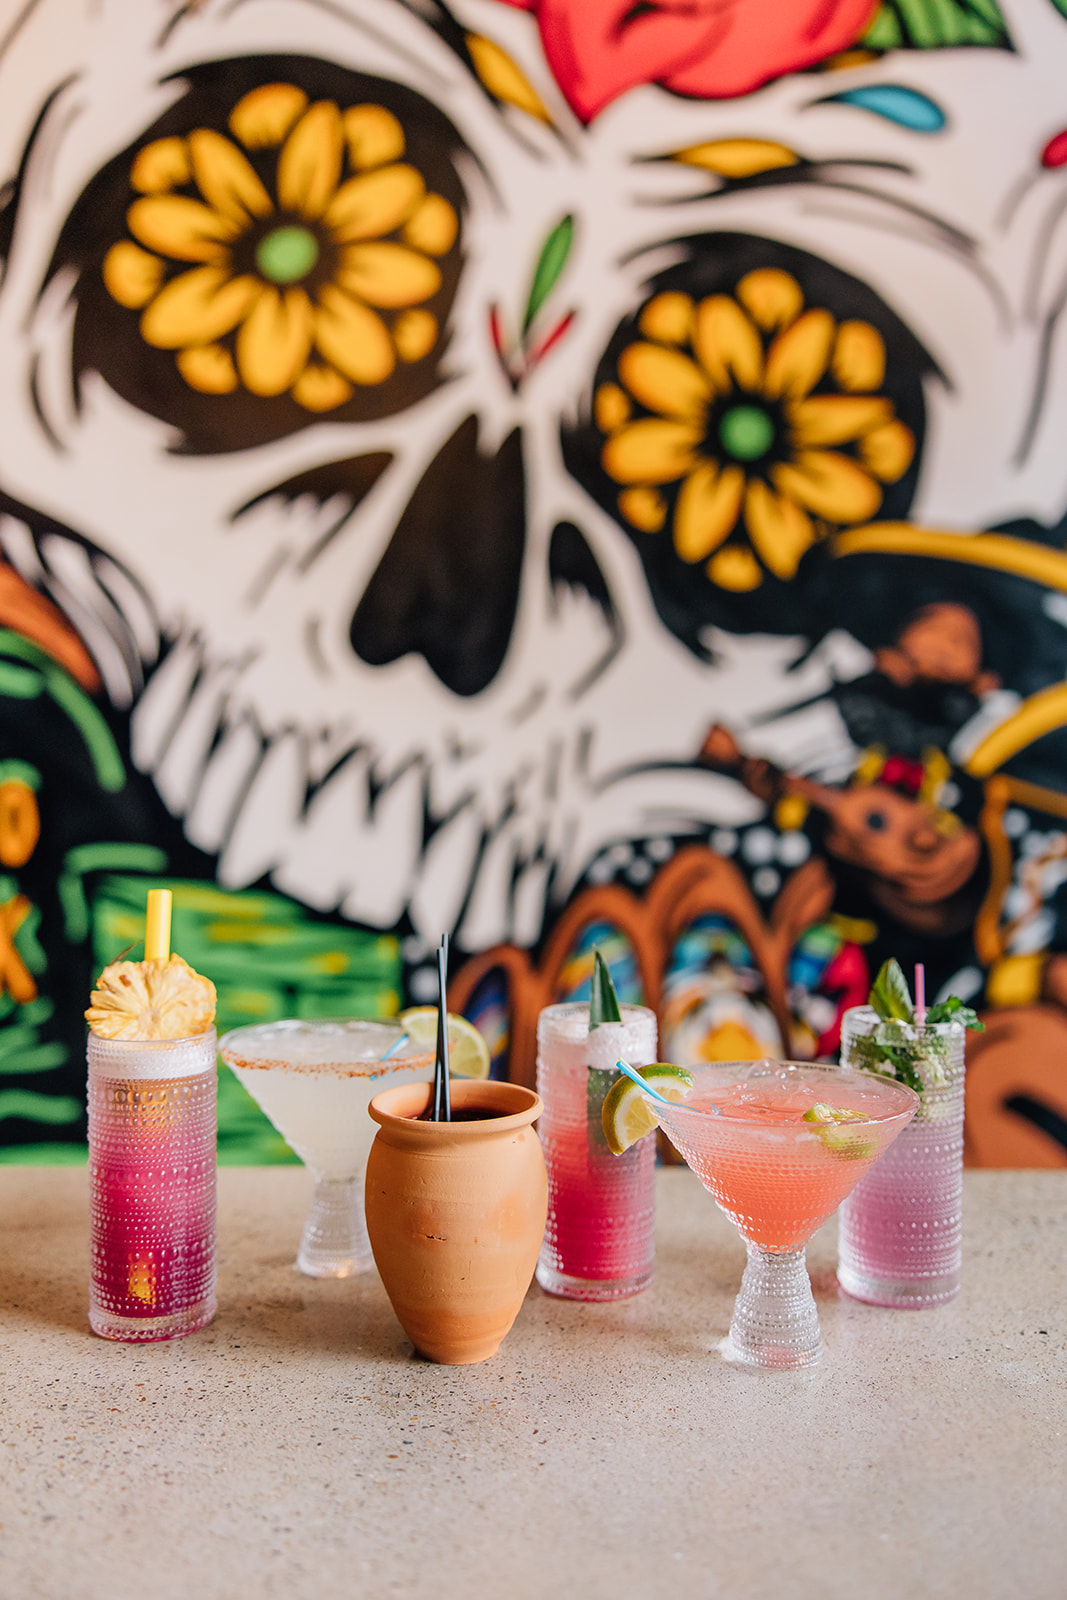 Specialty drinks on counter behind wall mural